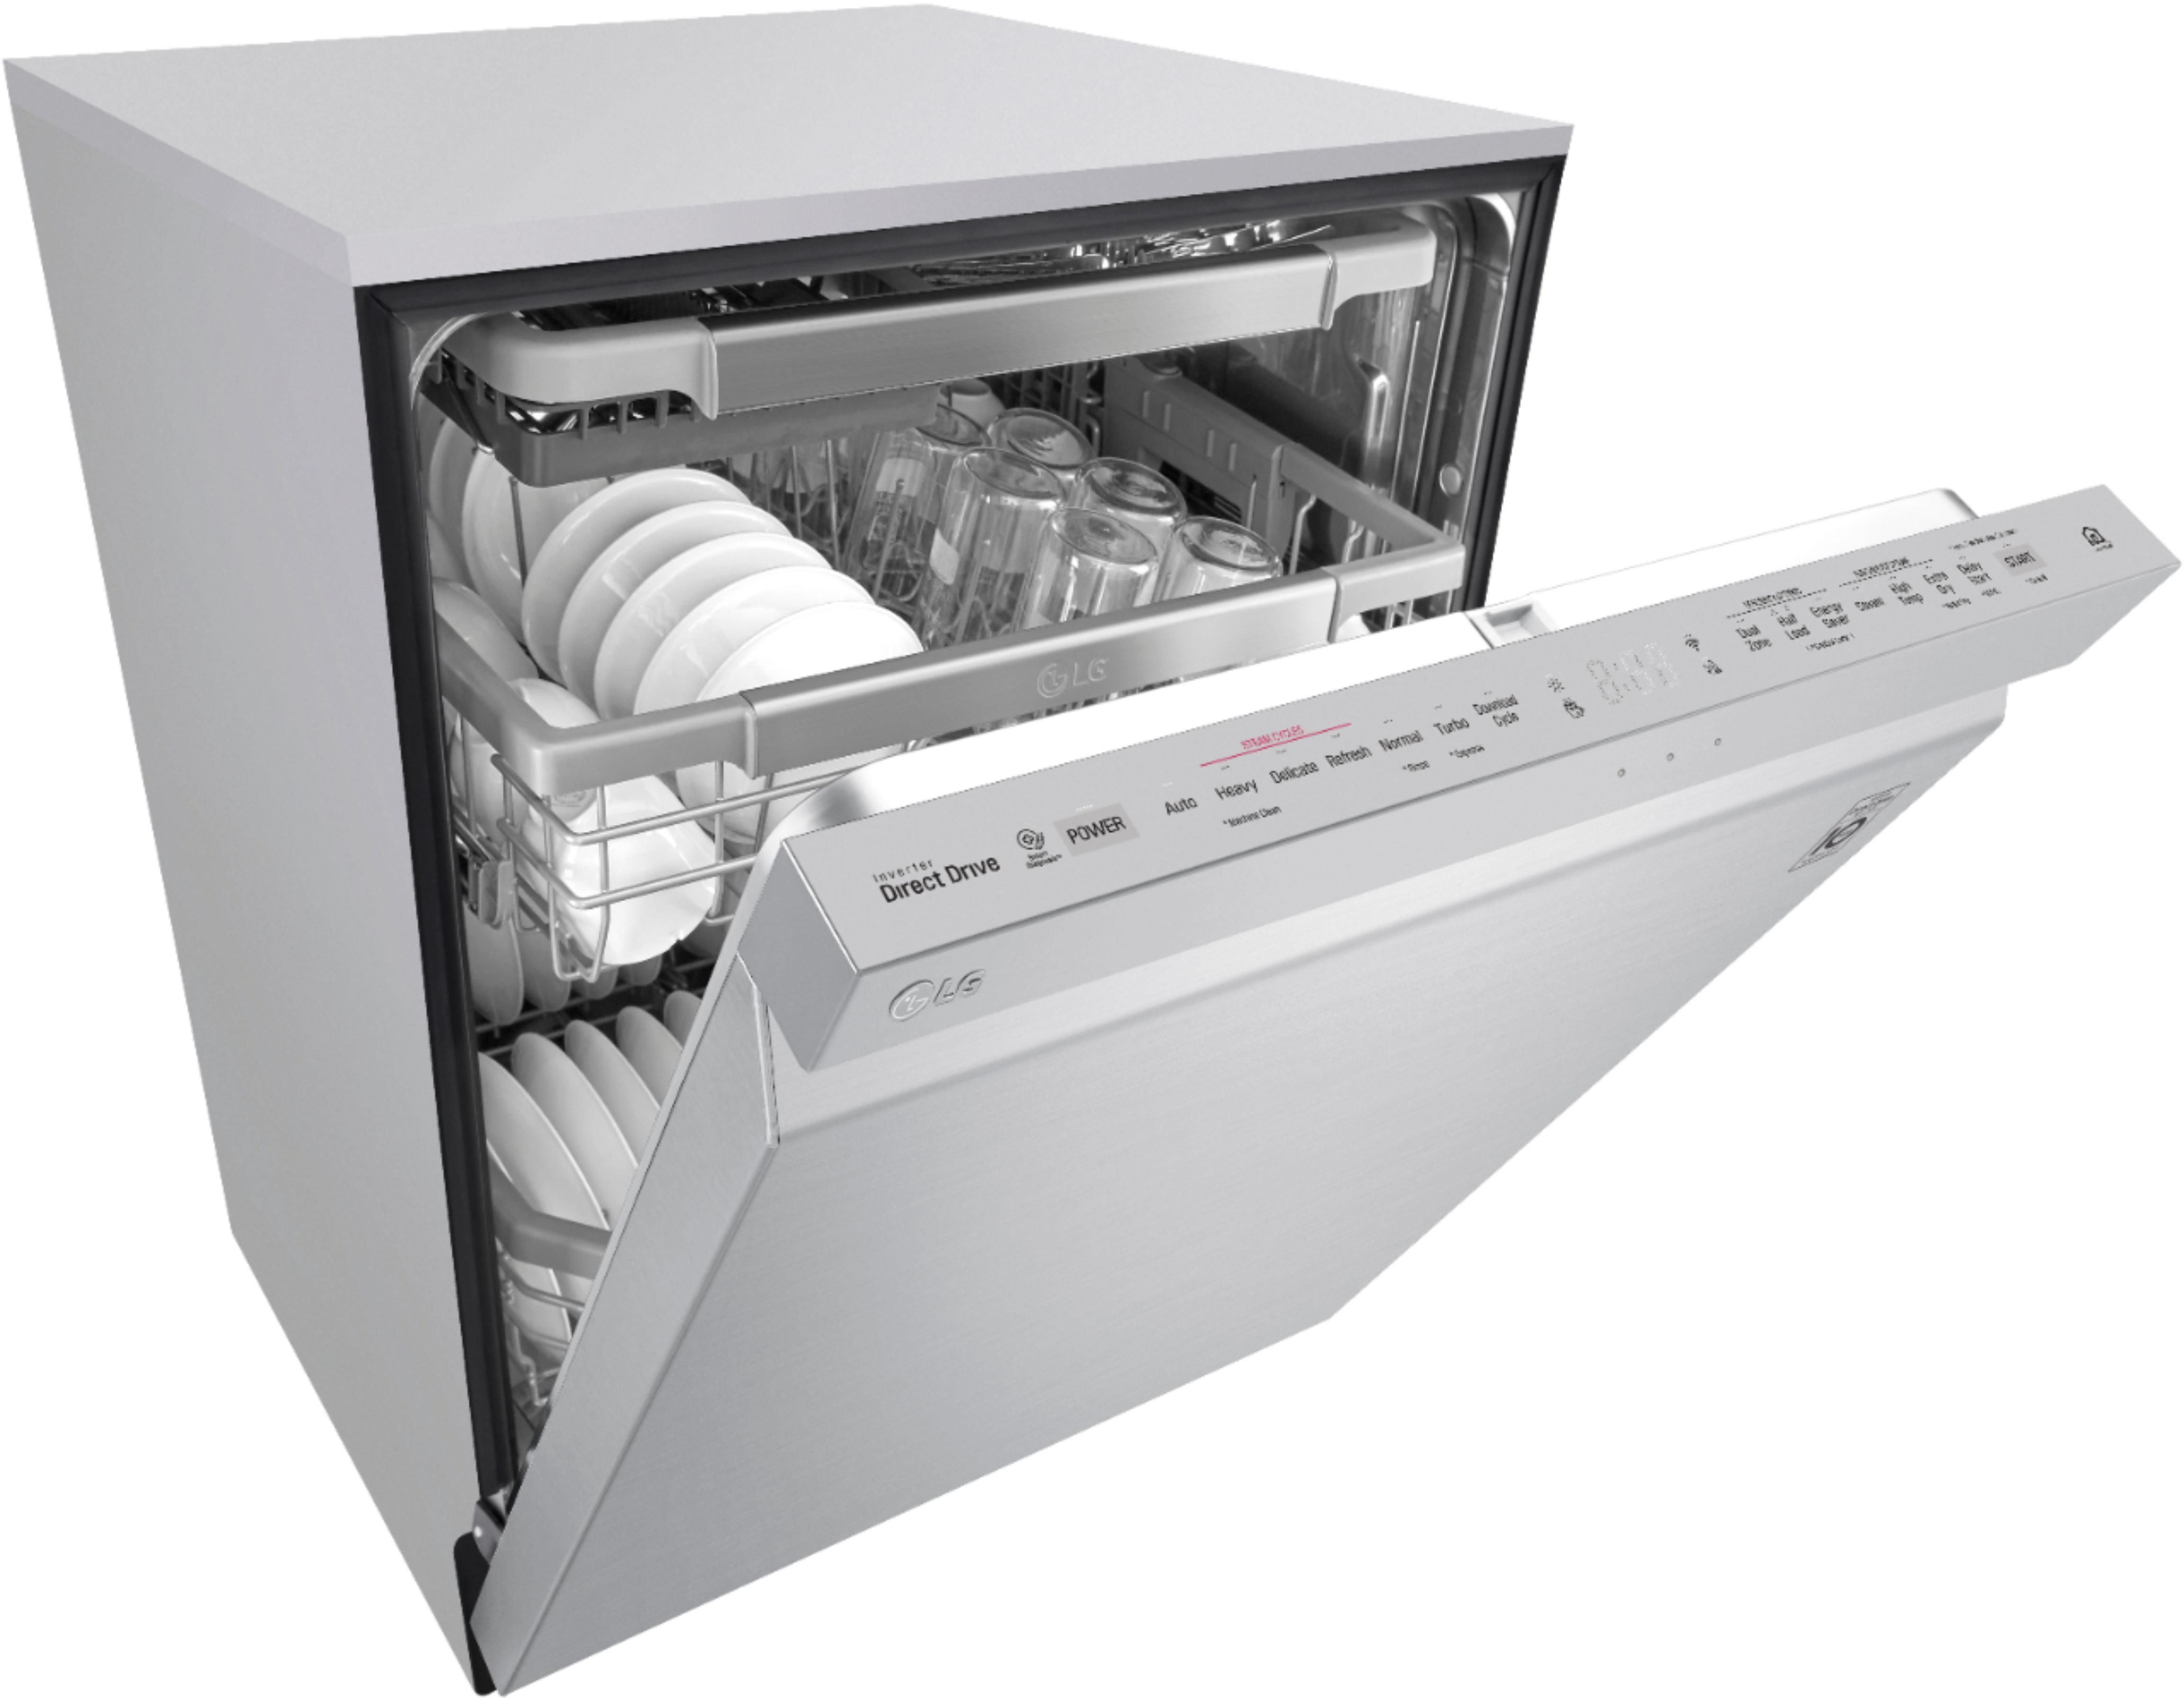 Angle View: GE - 24" Front Control Tall Tub Built-In Dishwasher - Bisque